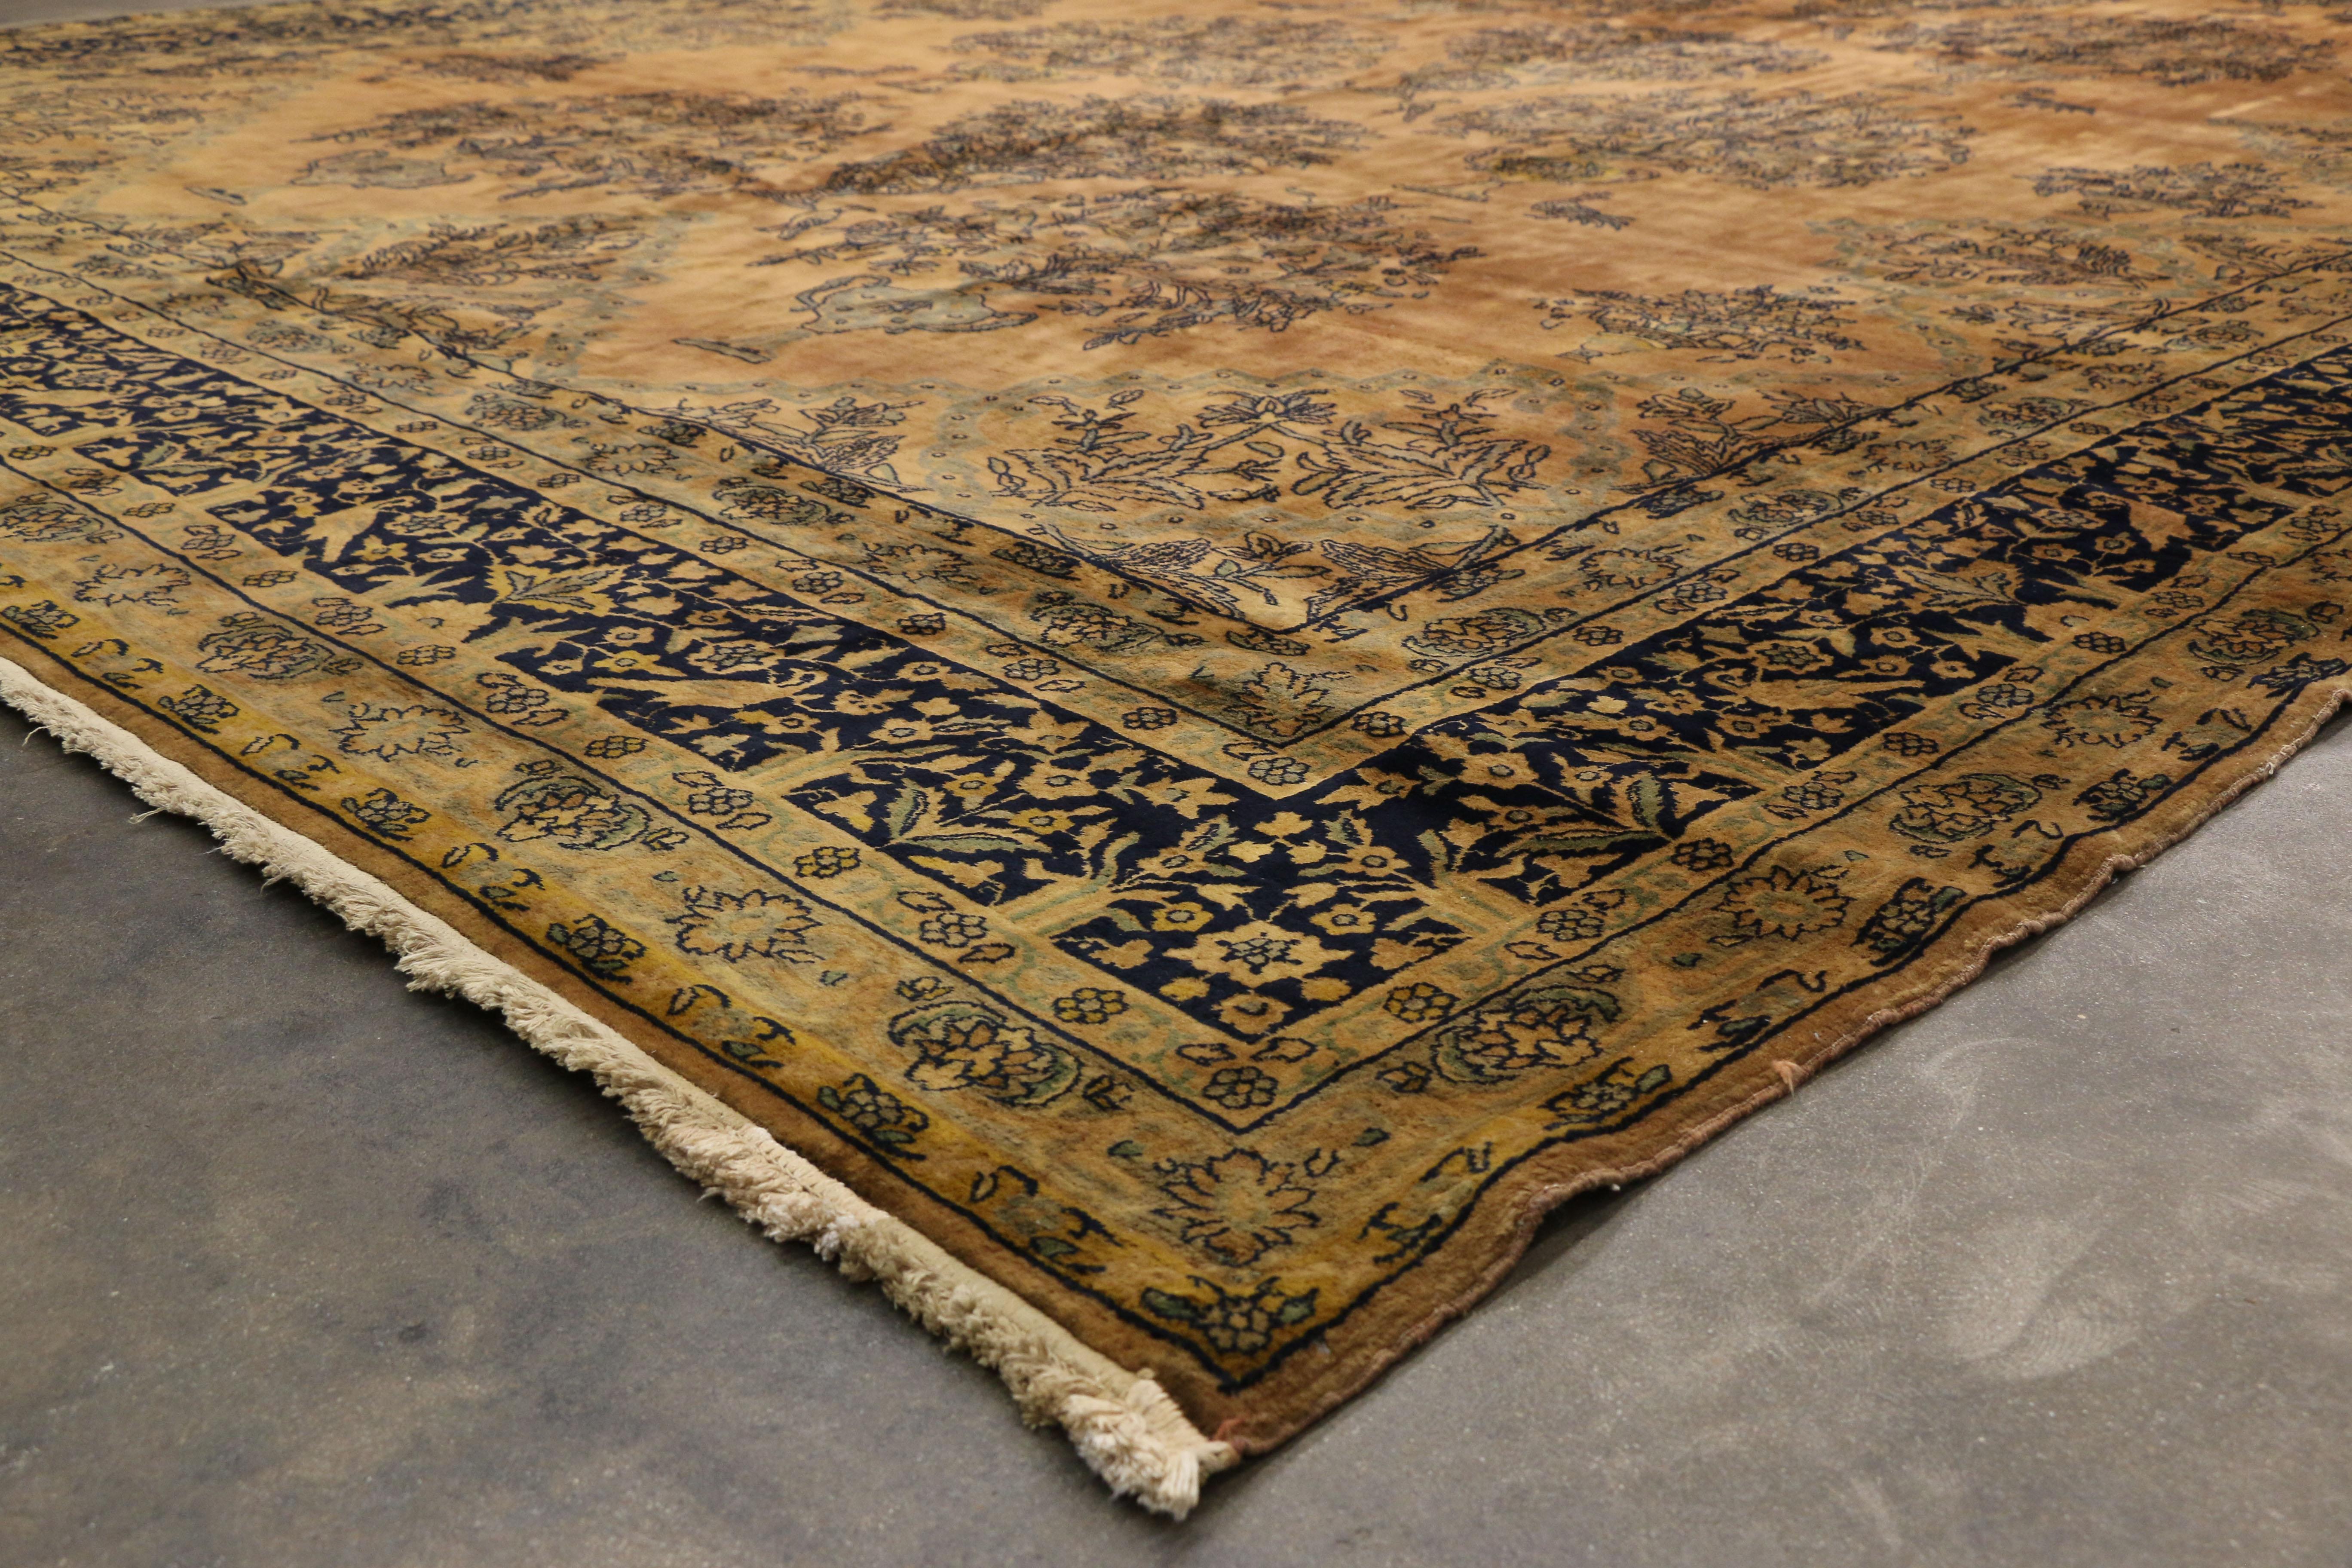 19th Century 1880s Antique Persian Kashan Rug Kork Manchester Wool, Hotel Lobby Size Carpet For Sale